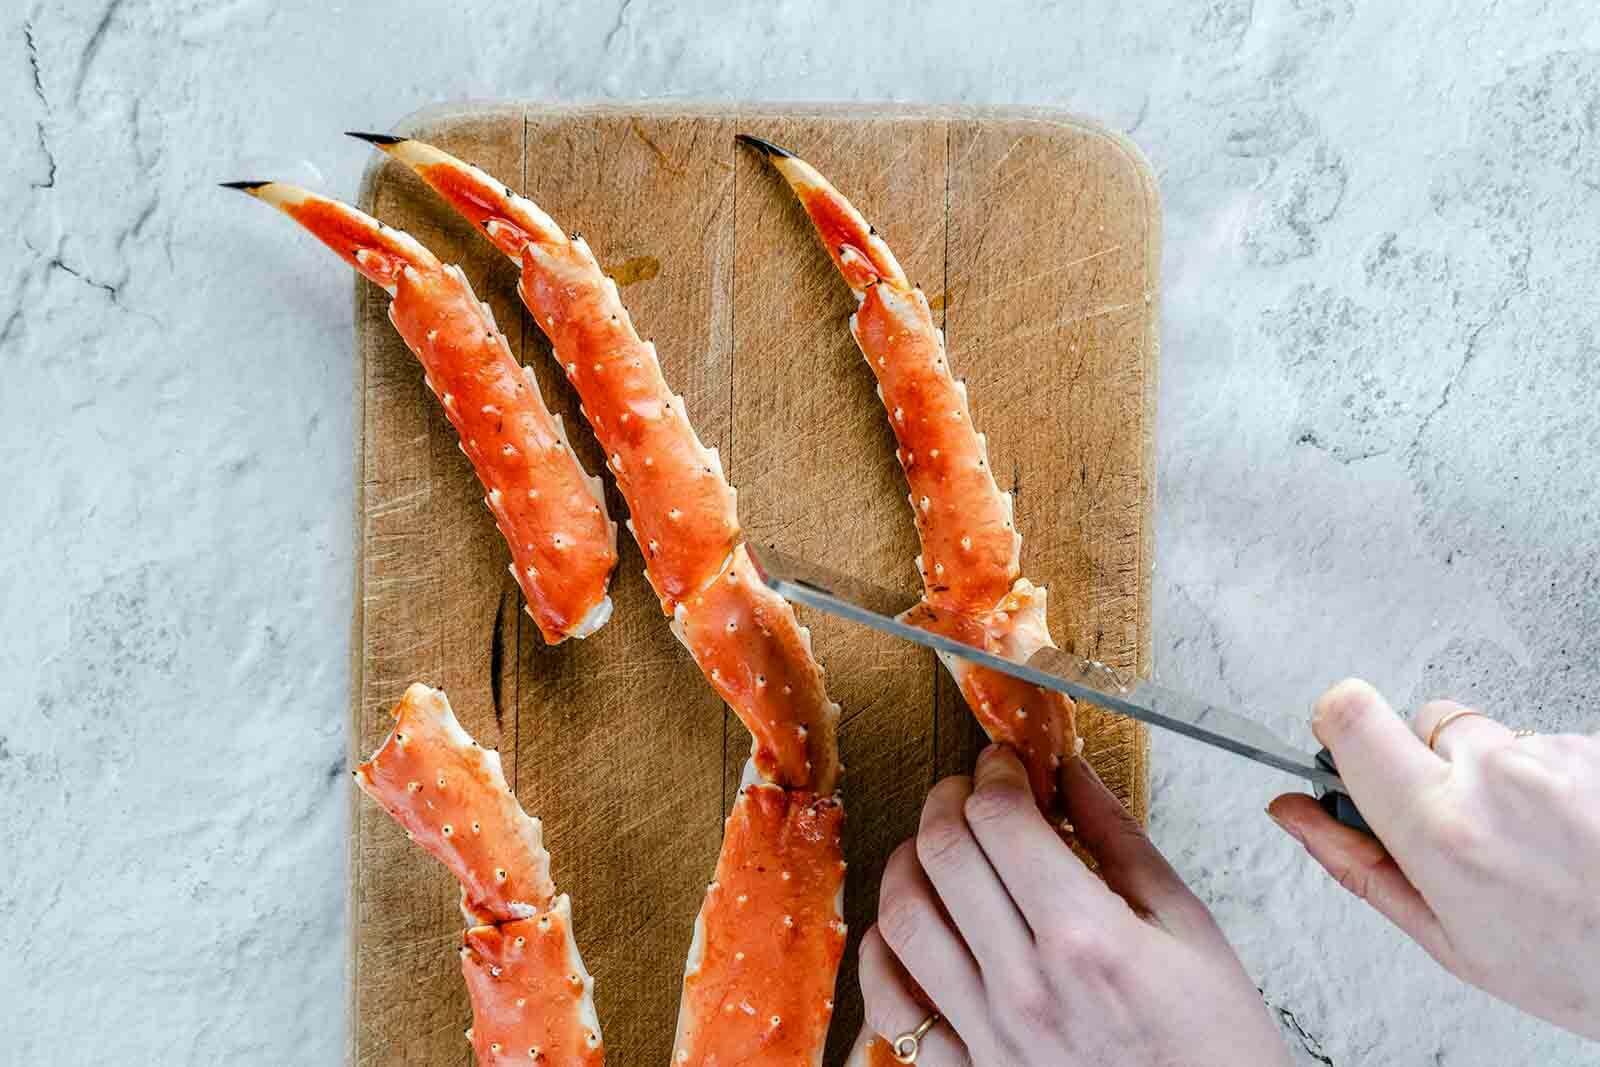 King crab claws, in chilli and garlic